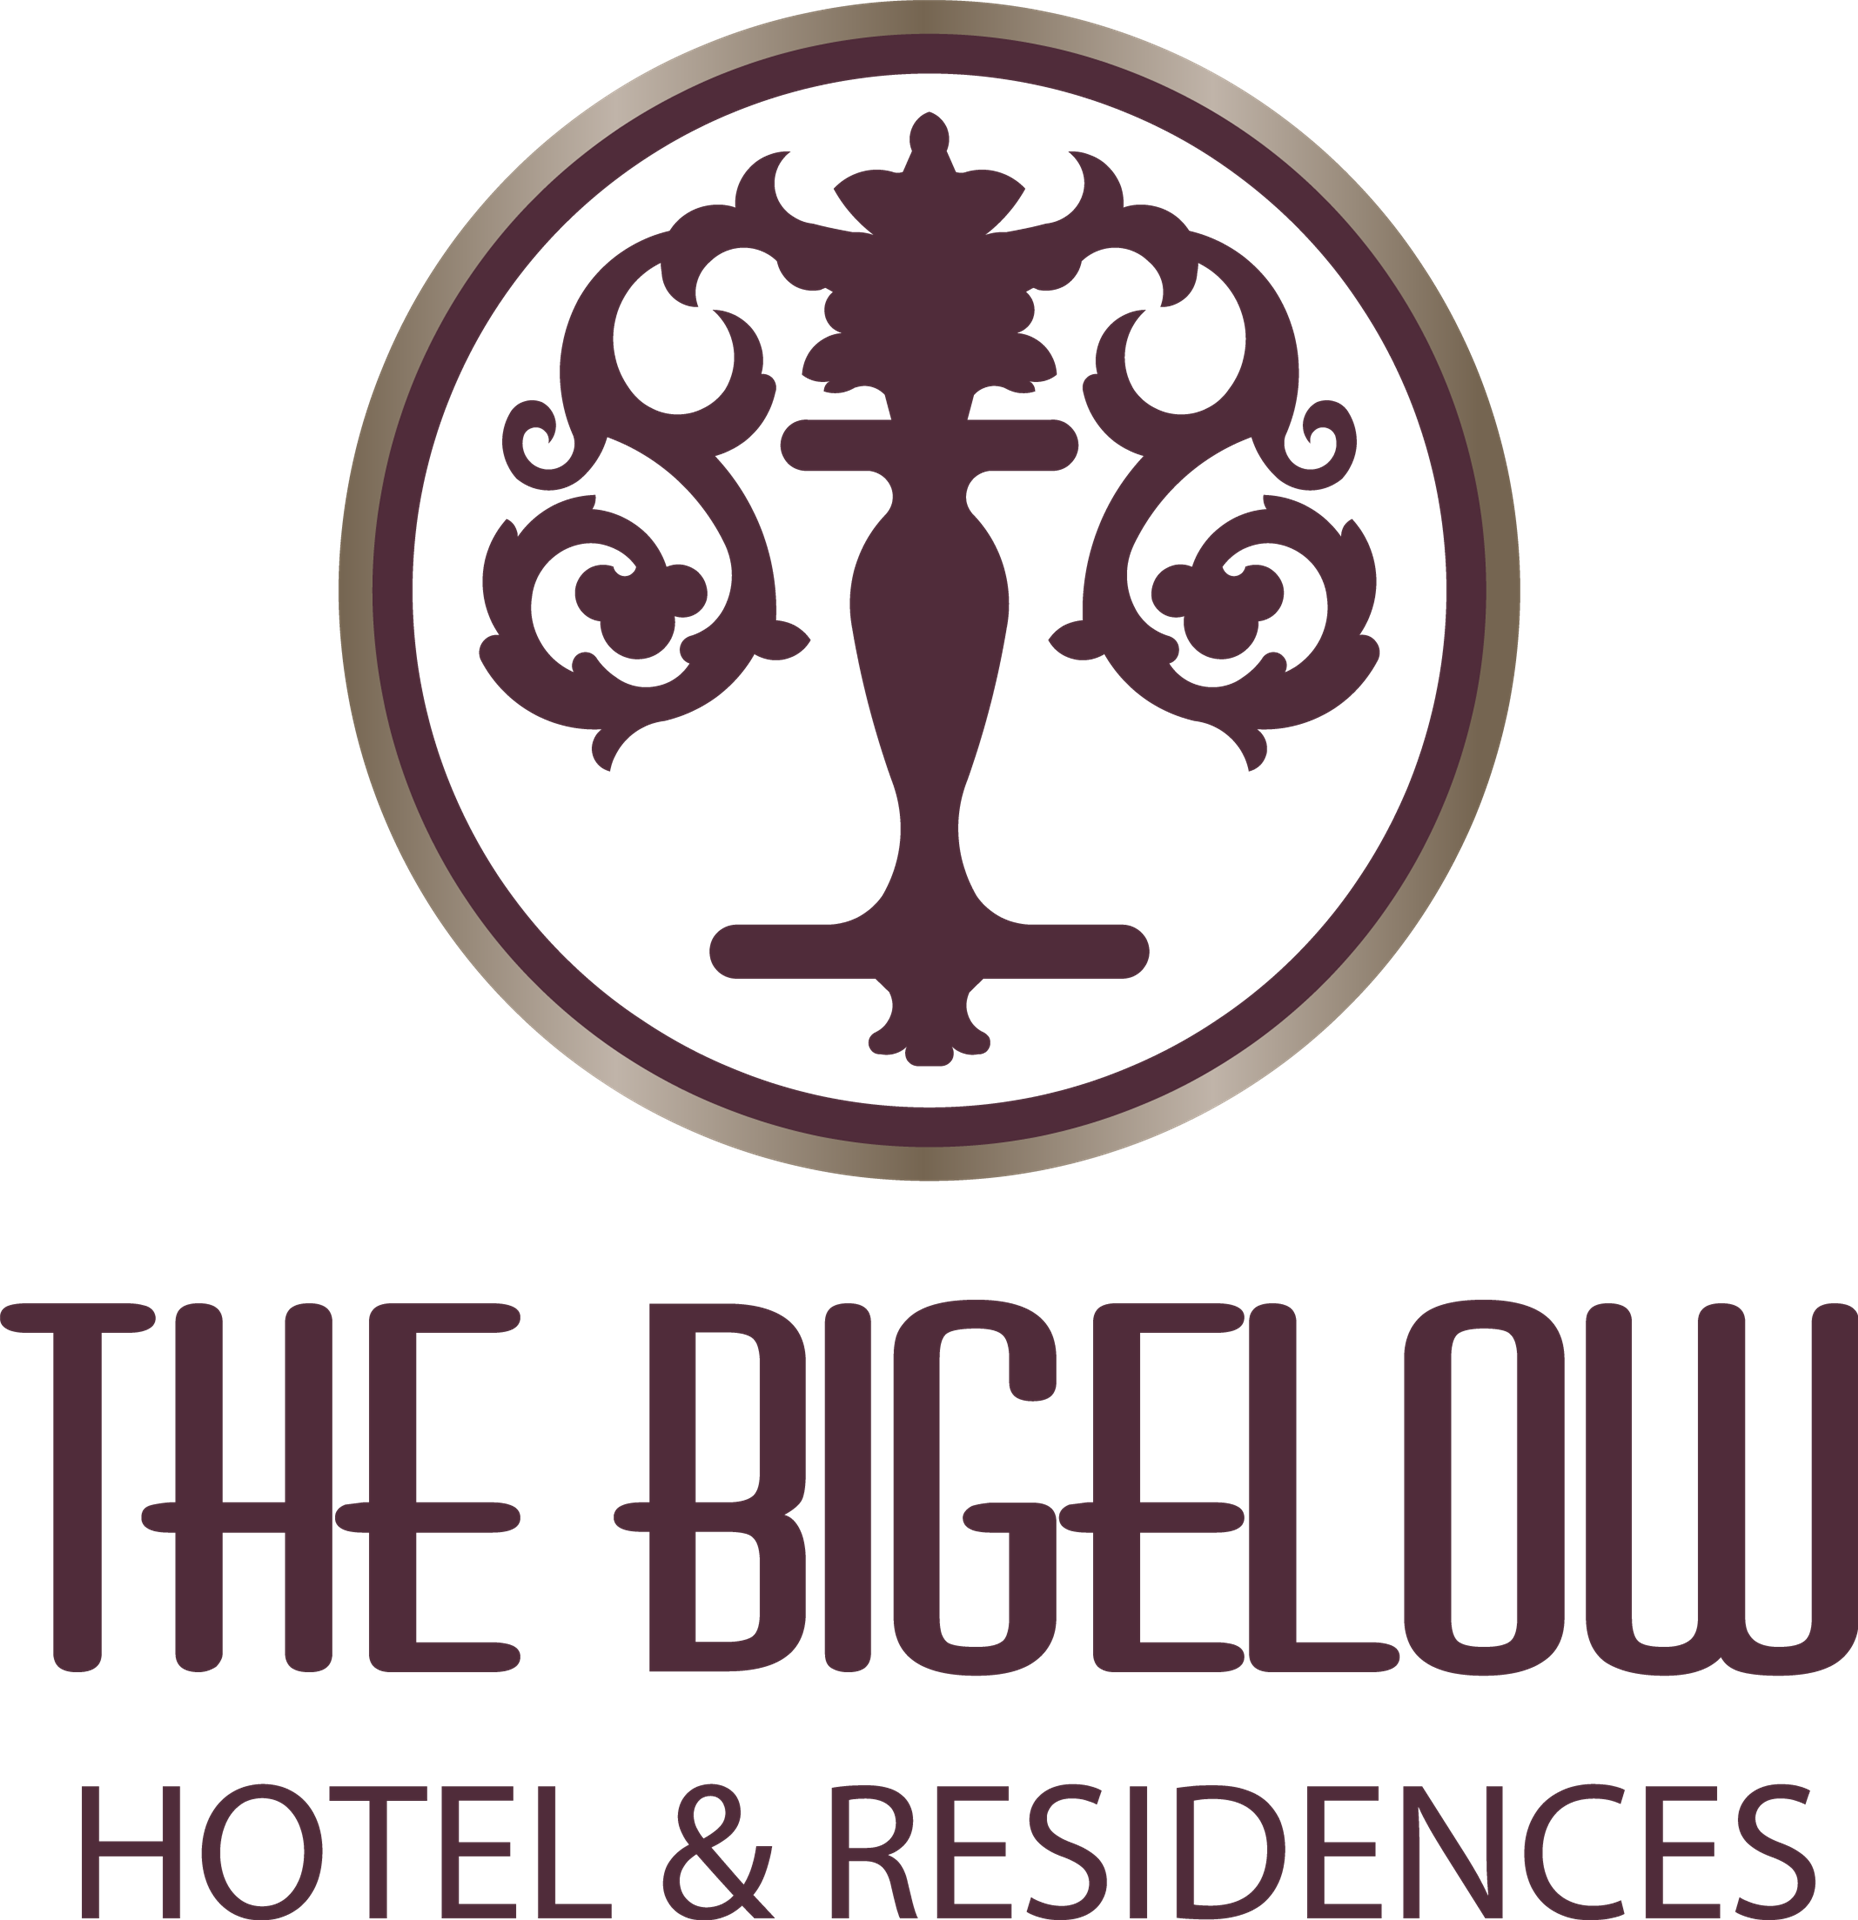 Bigelow Hotel and Residences, an Ascend Hotel Collection Member